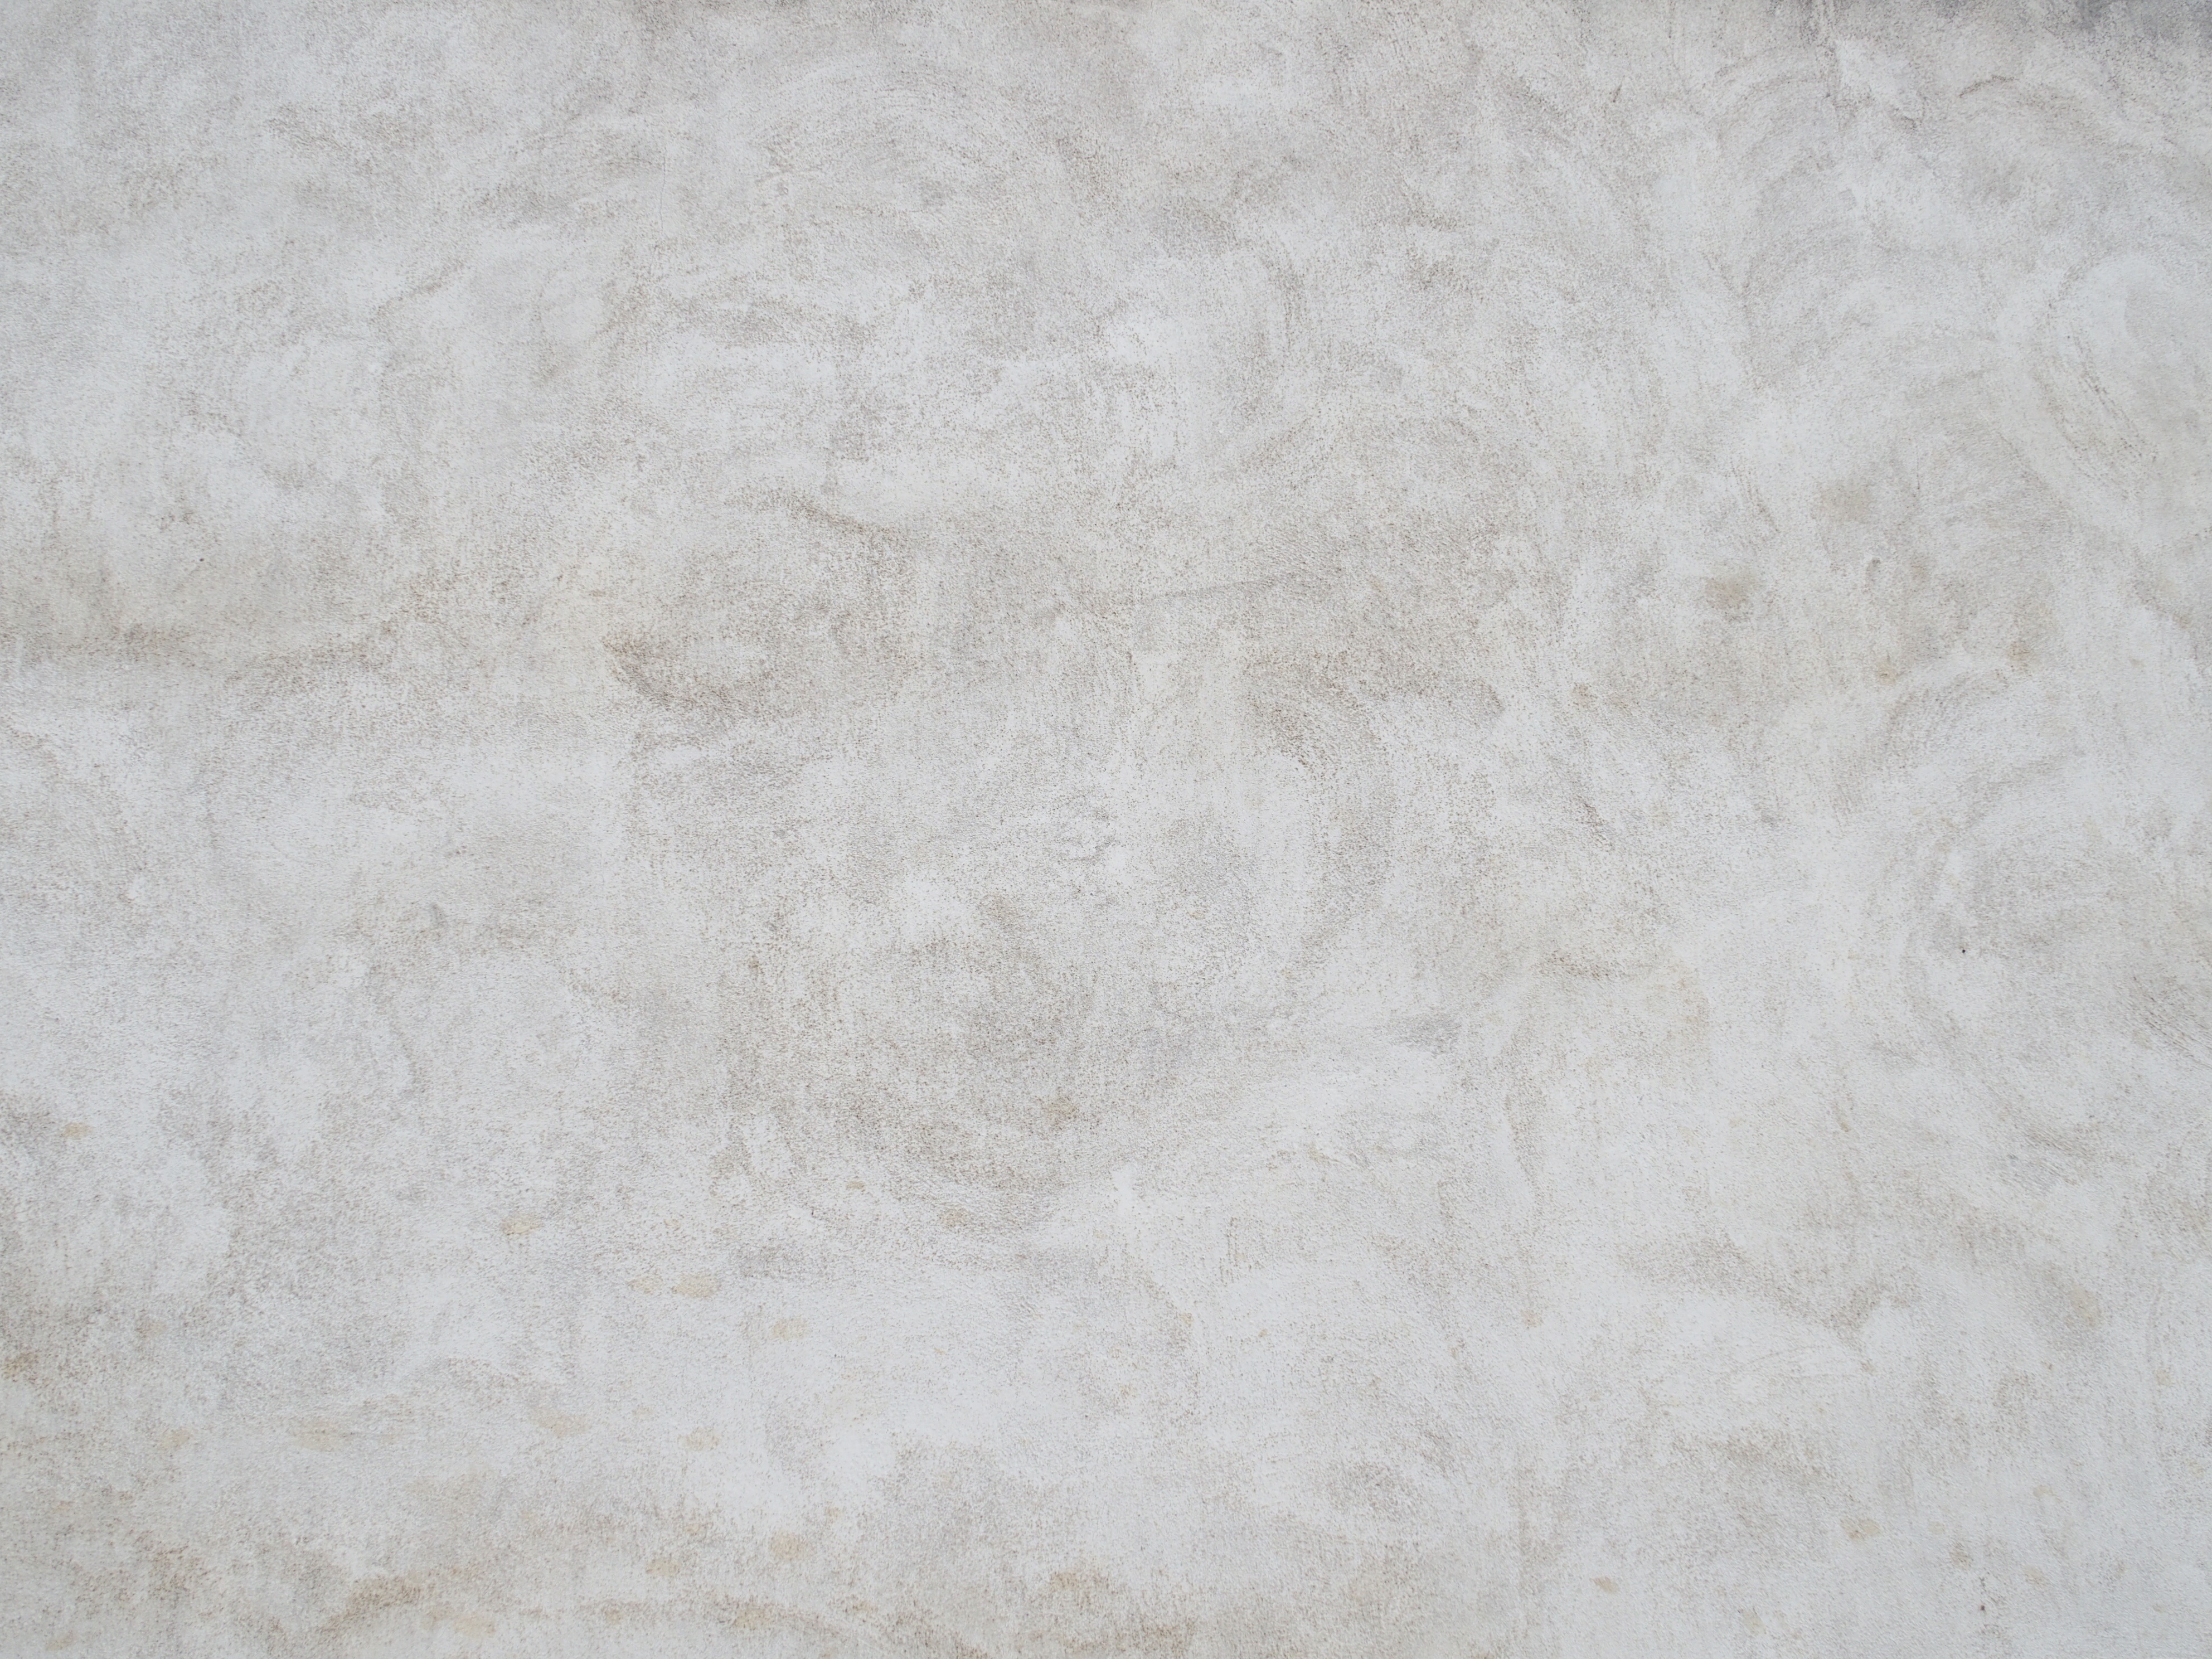 Free Images : white, floor, gray, tile, material, concrete, surface ...